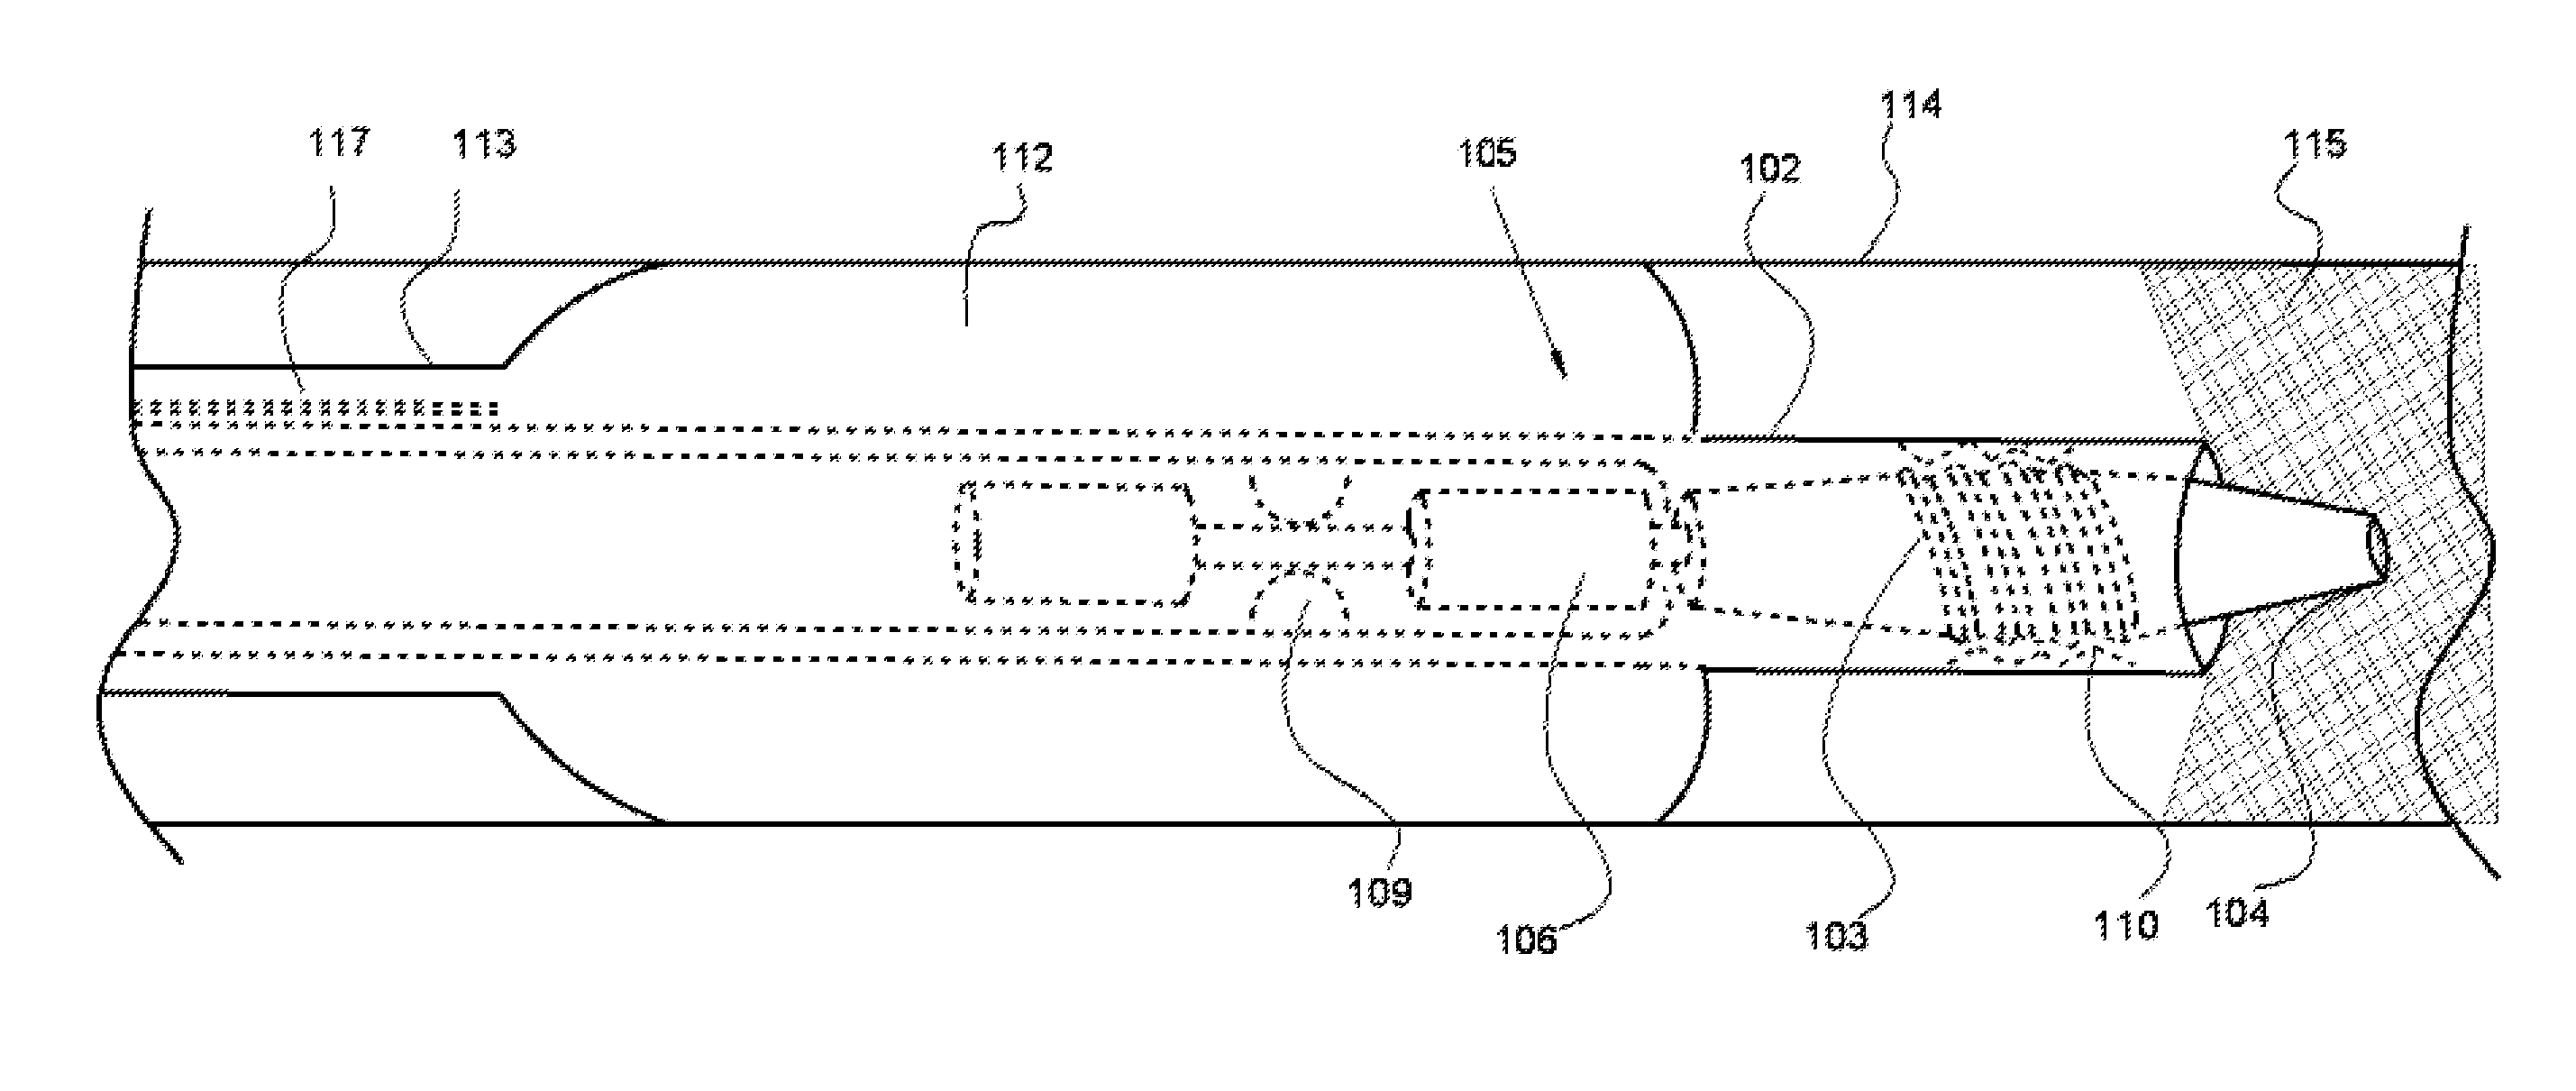 System and Method for the Treatment of Occluded Vessels